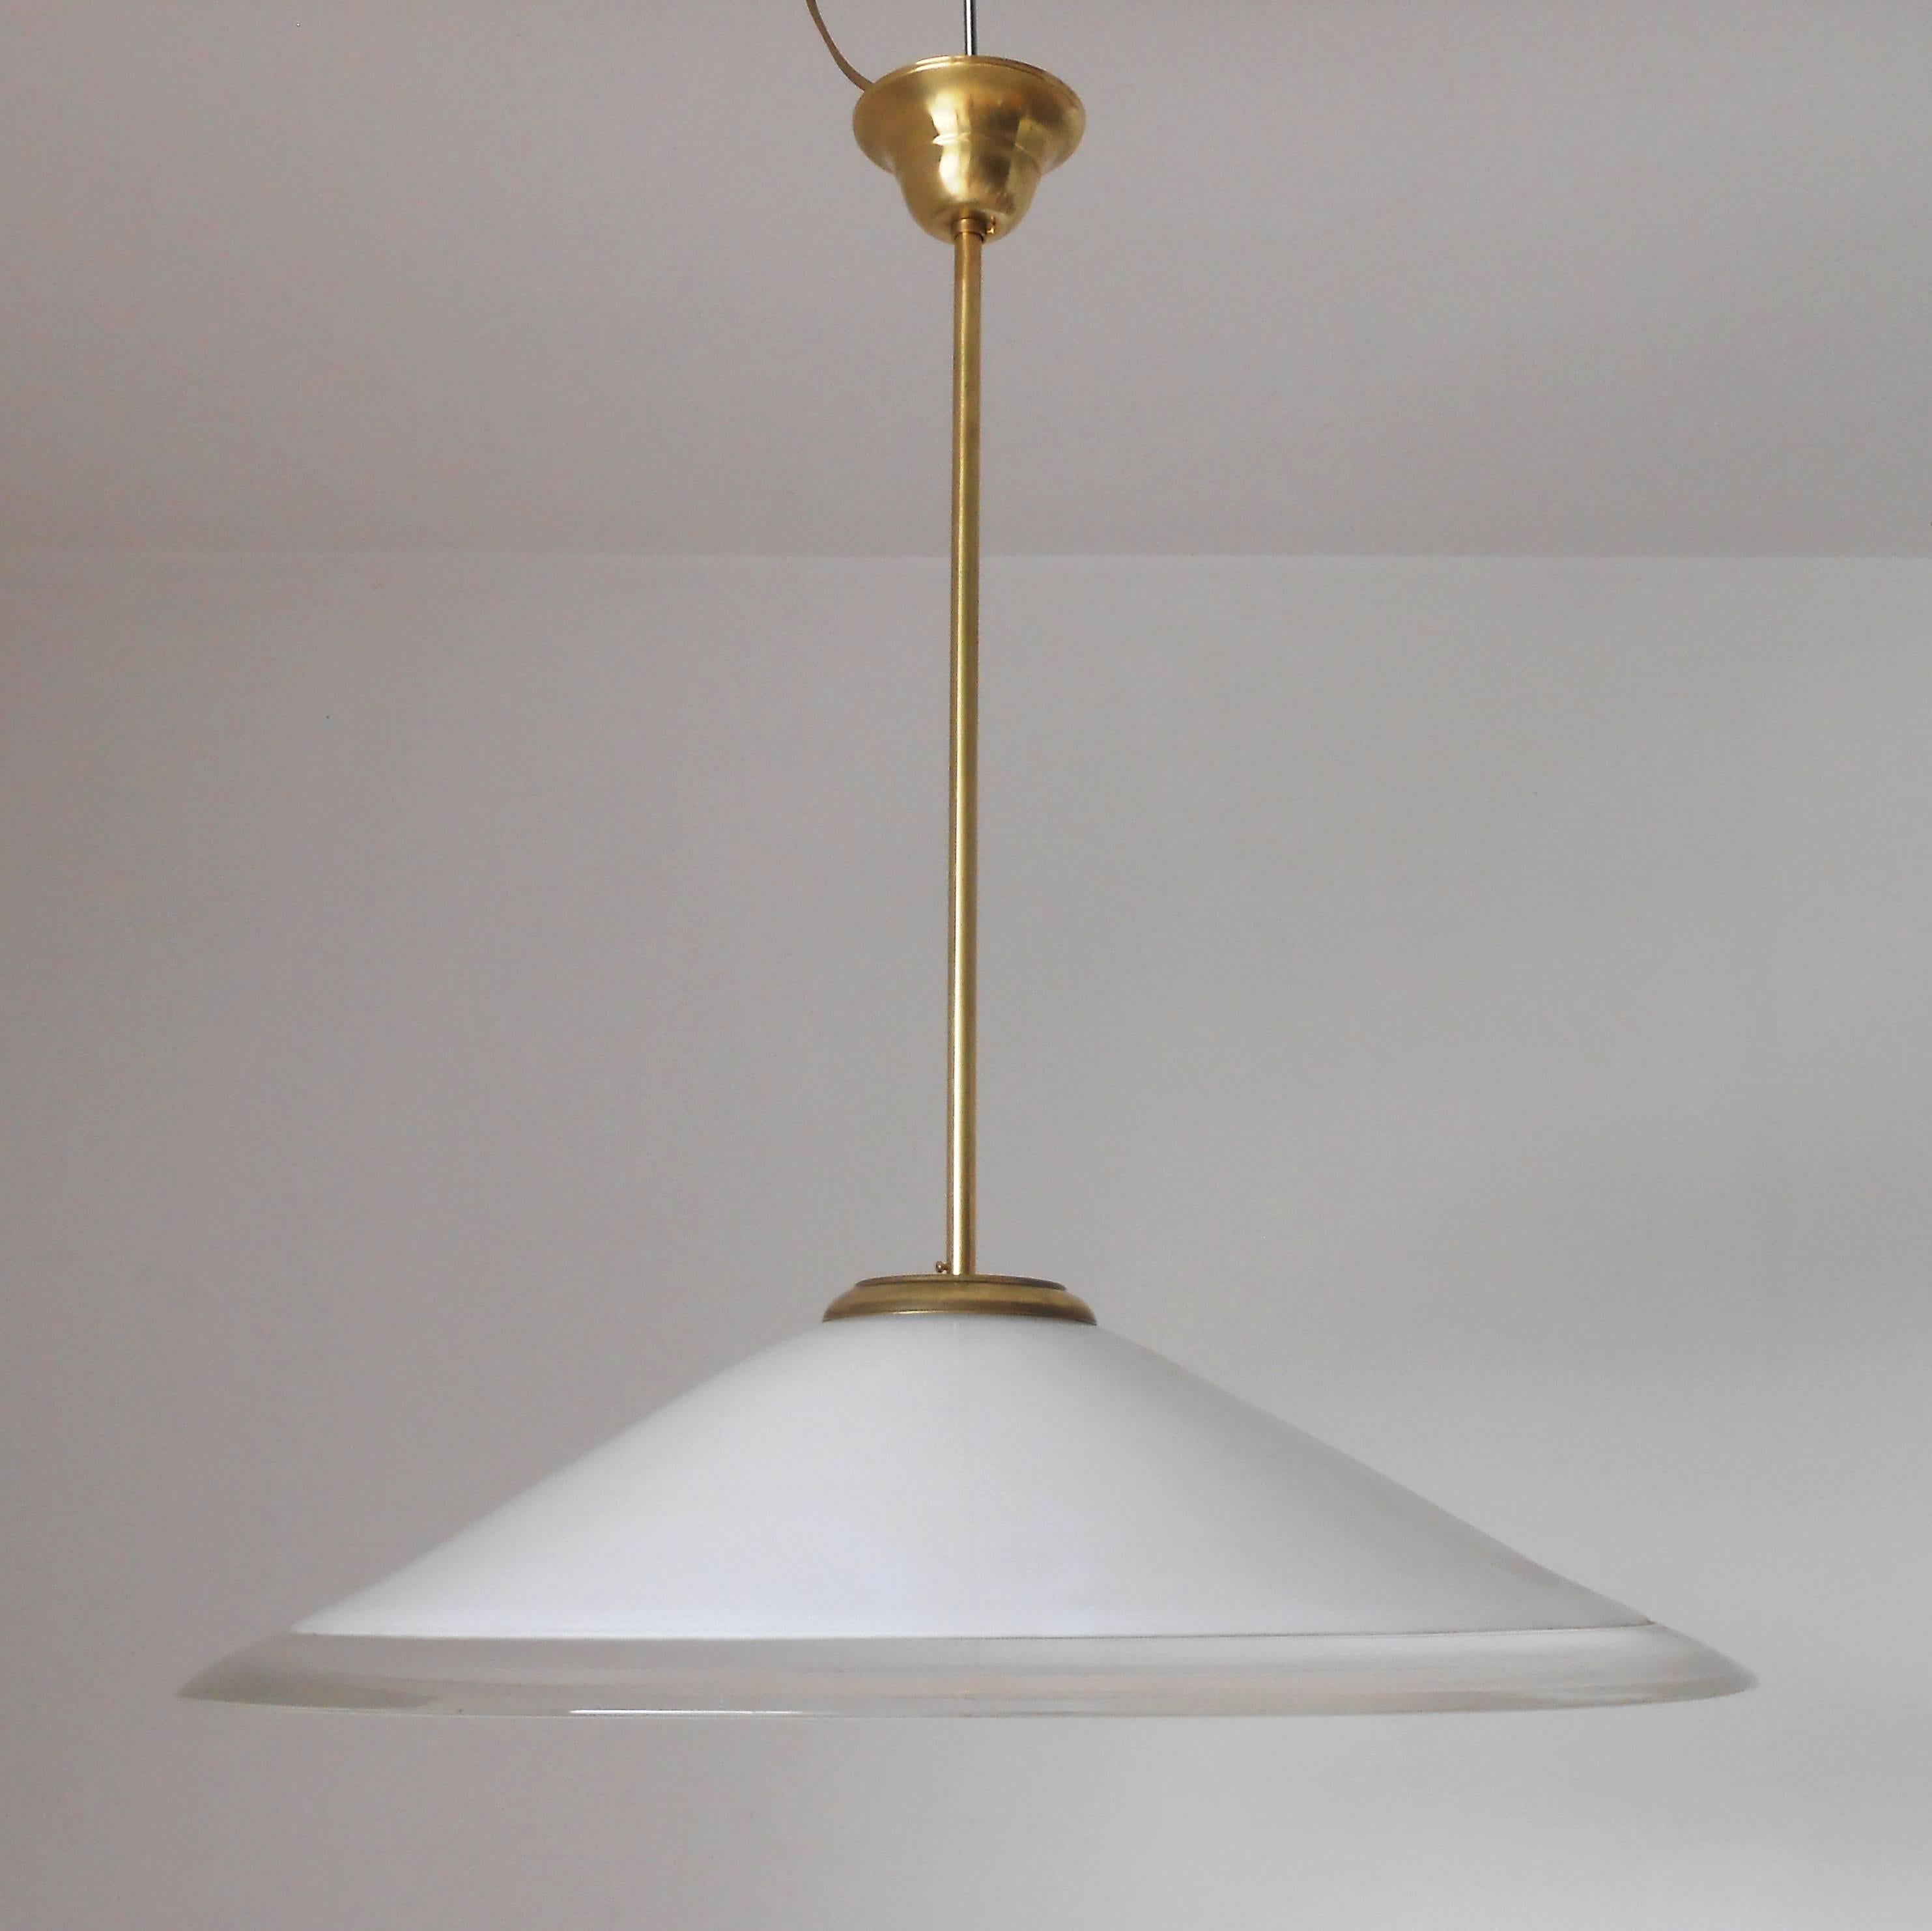 Vintage Italian pendant with white and clear Murano glass shade, mounted on brass hardware / Original sticker on the glass / Designed by Leucos circa 1960’s / Made in Italy
1 light / E26 or E27 type / max 60W 
Diameter: 25.5 inches / Height: 30